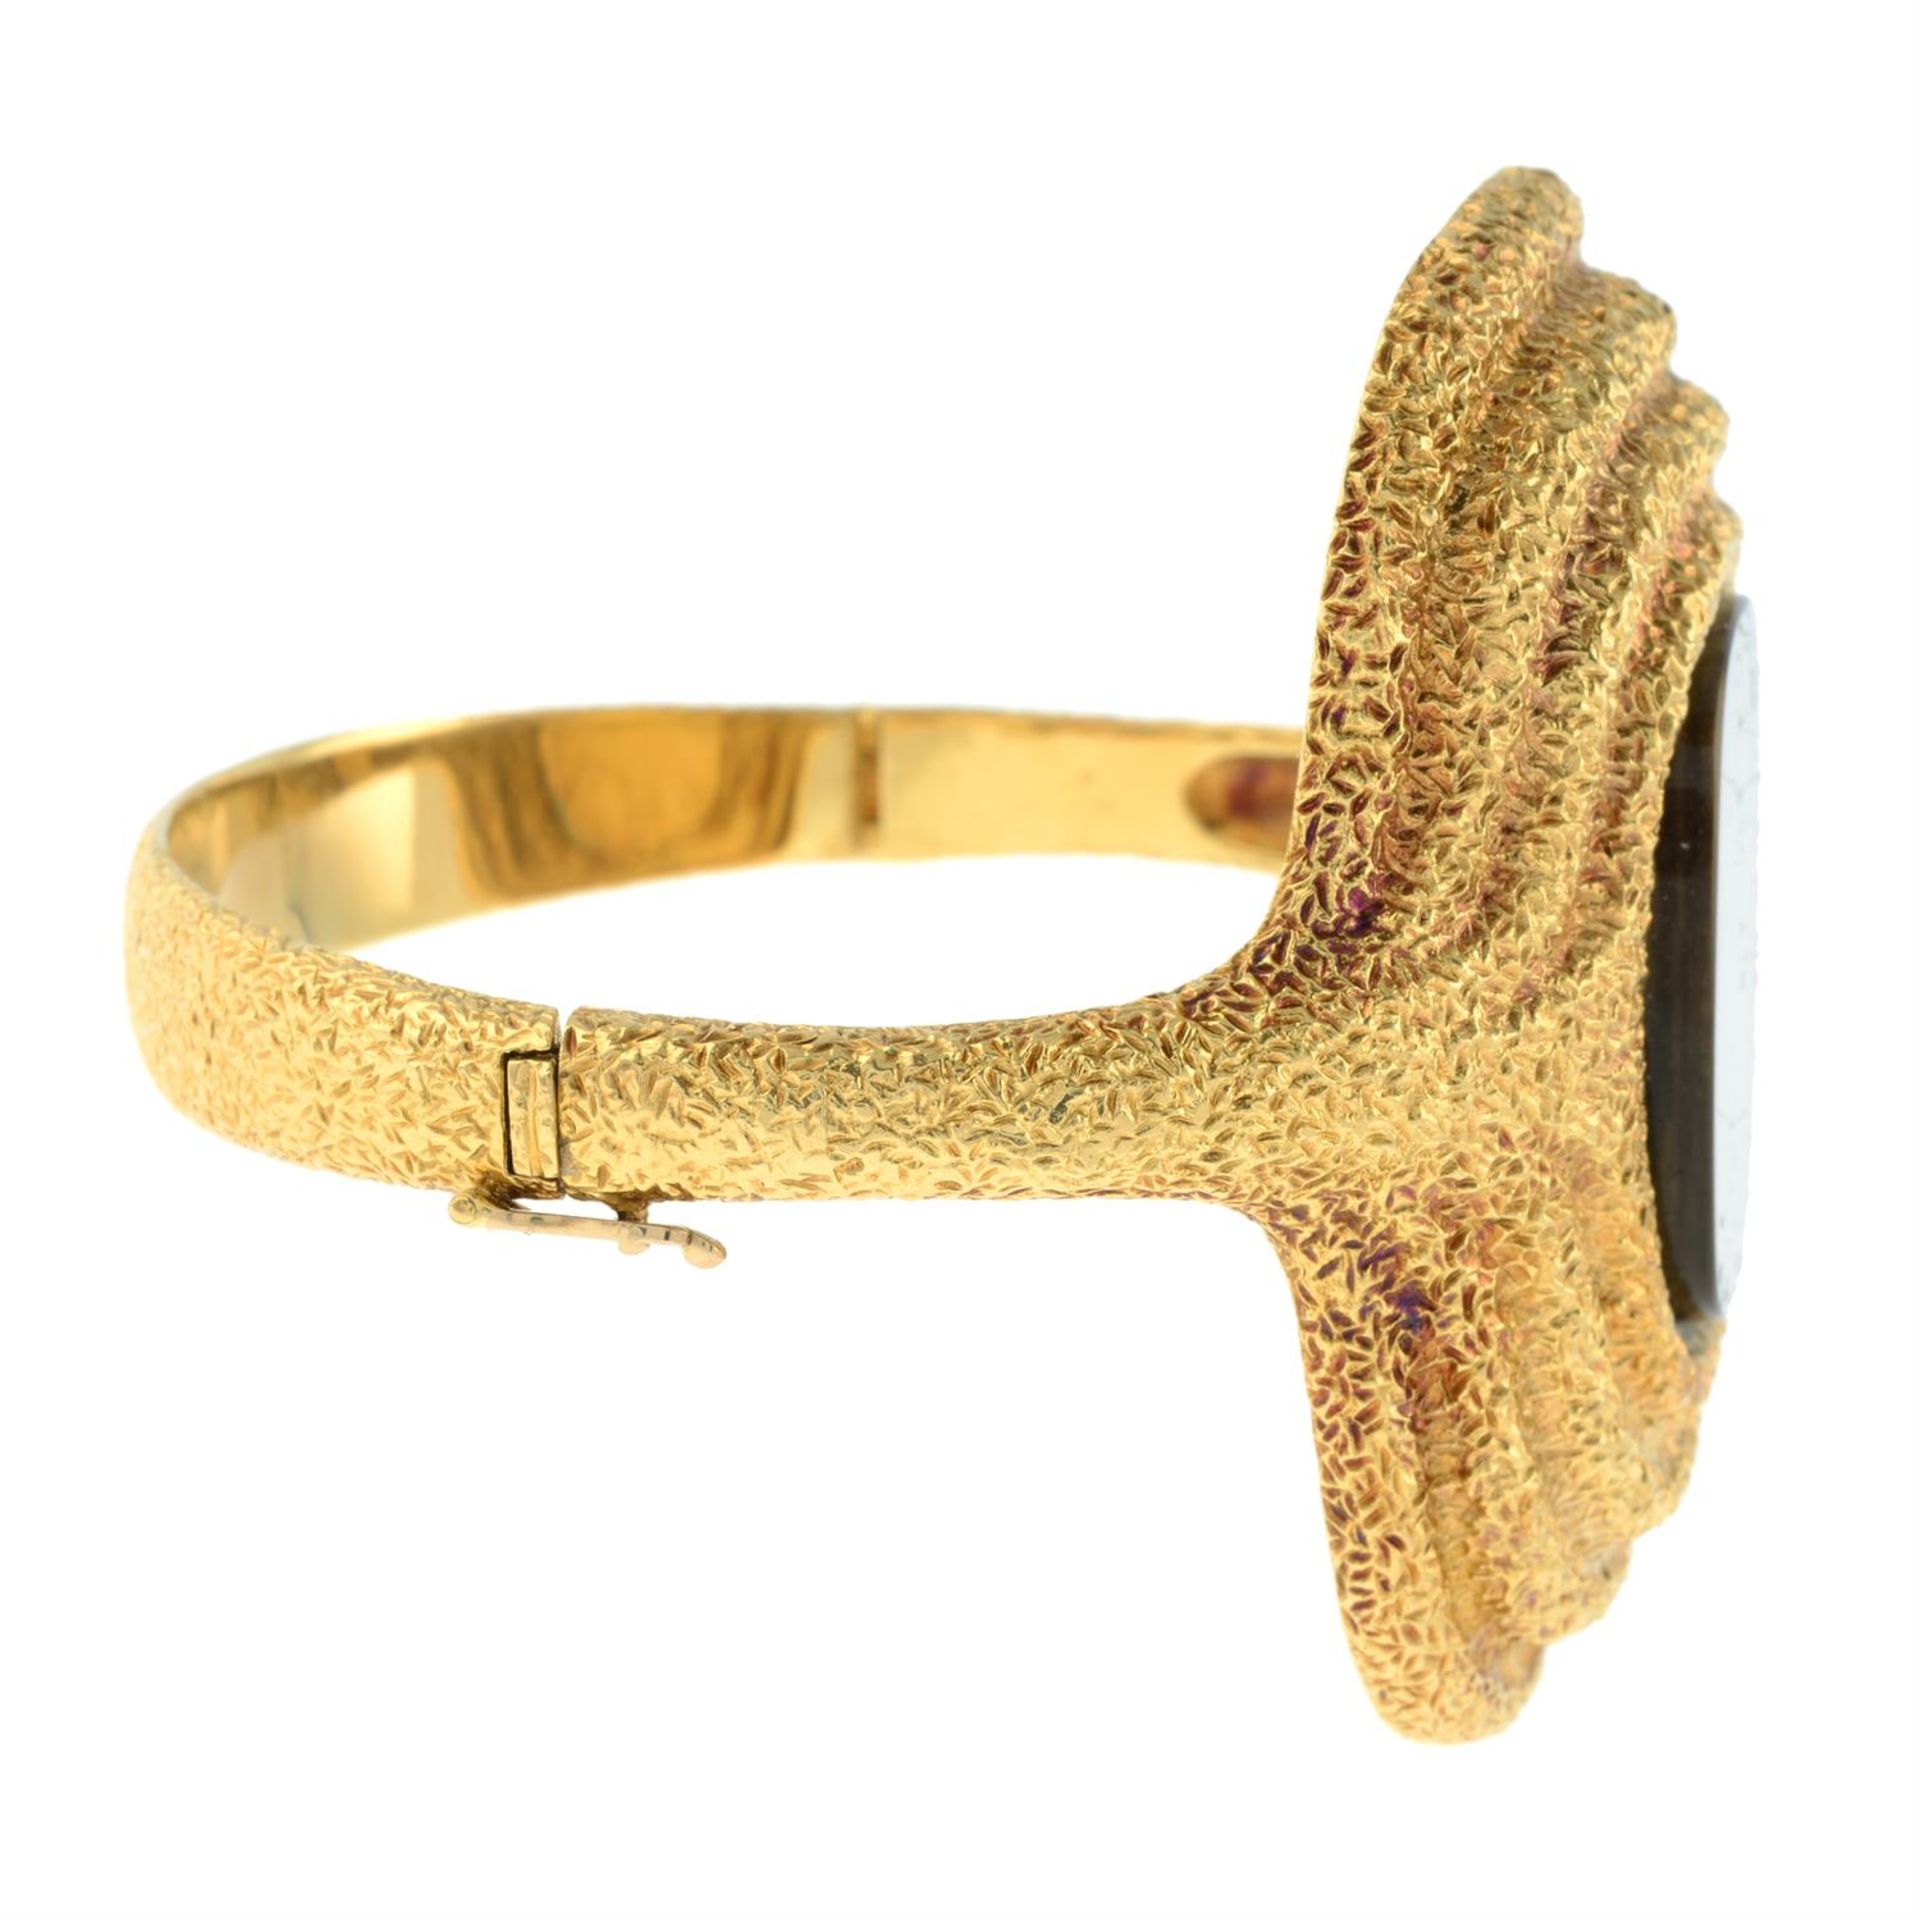 A 1970s 18ct gold watch bangle, with textured surrounds, by Chopard. - Image 4 of 4